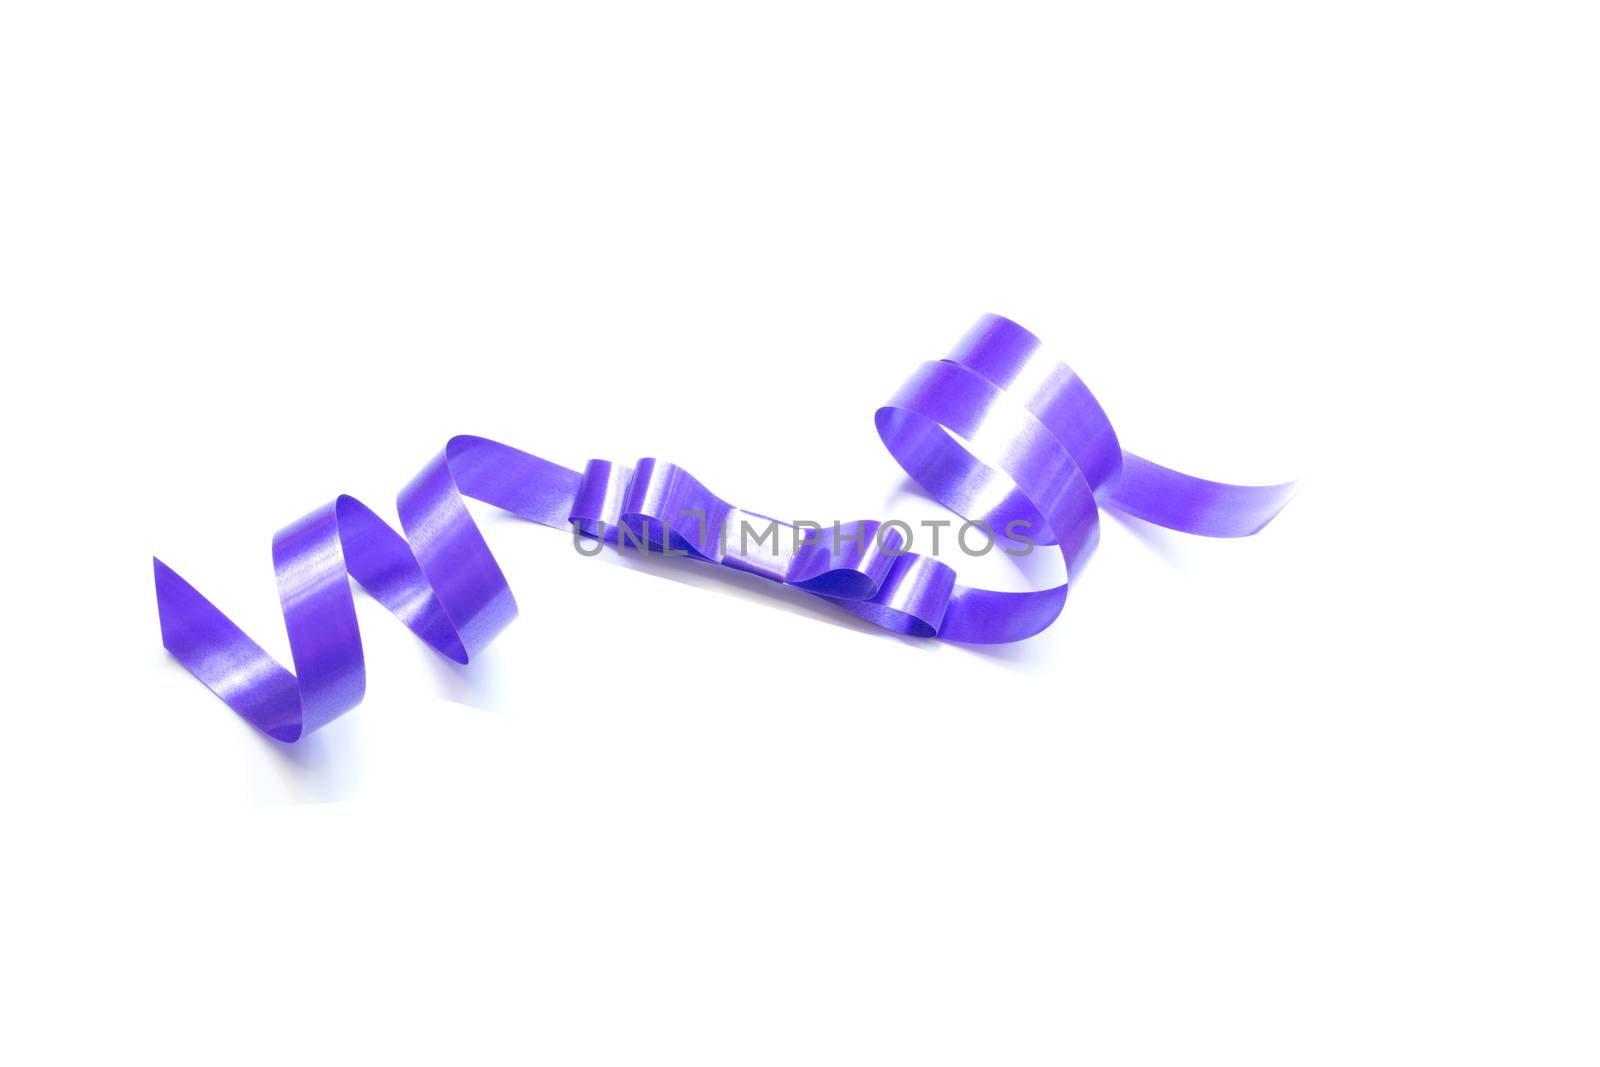 the spiral purple ribbon isolated on white background.